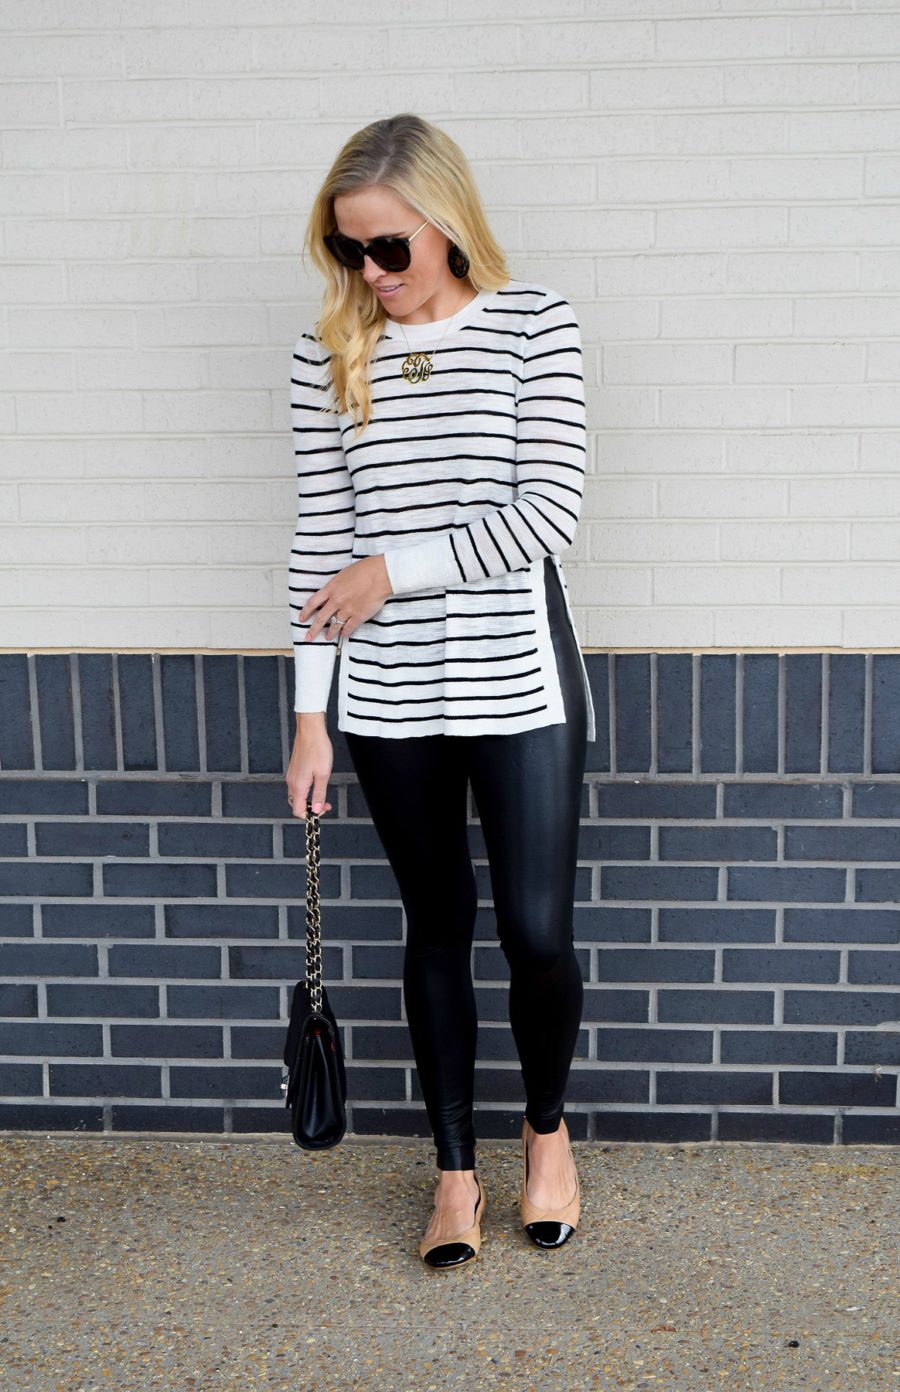 leggings with flats